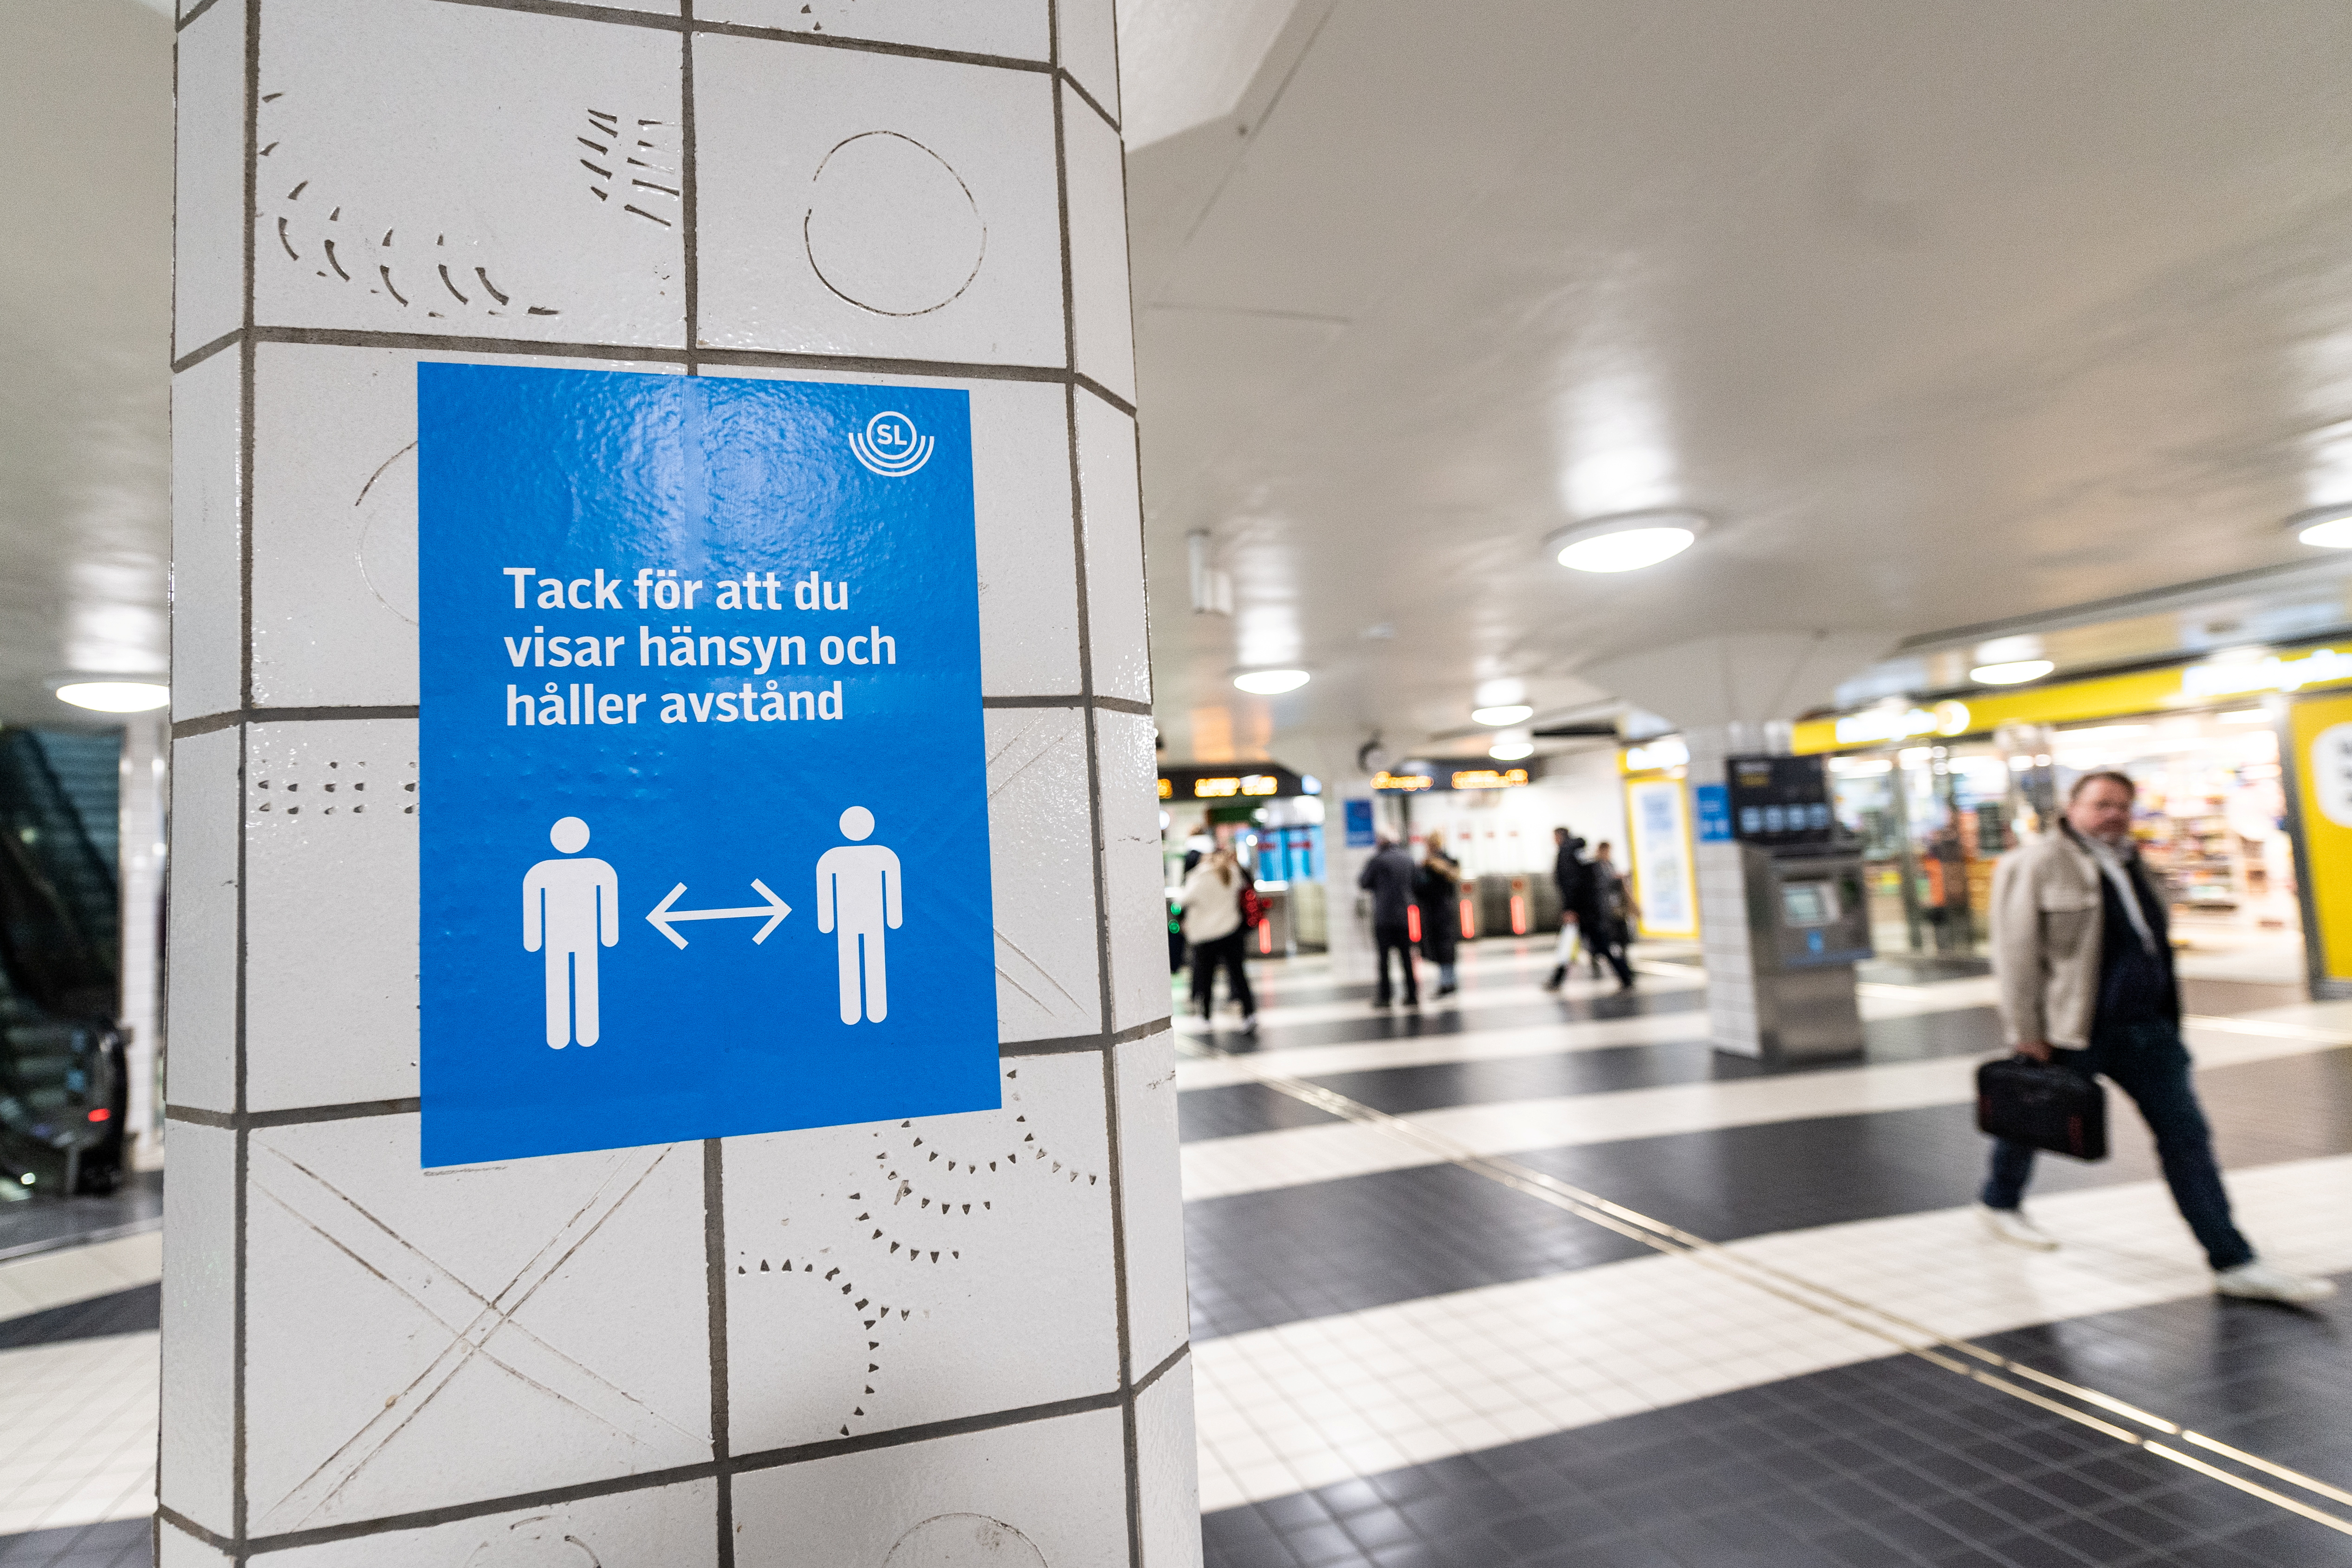 A sign reminding people to respect social distancing is seen amid the coronavirus disease (COVID-19) outbreak, at the Central Station in Stockholm